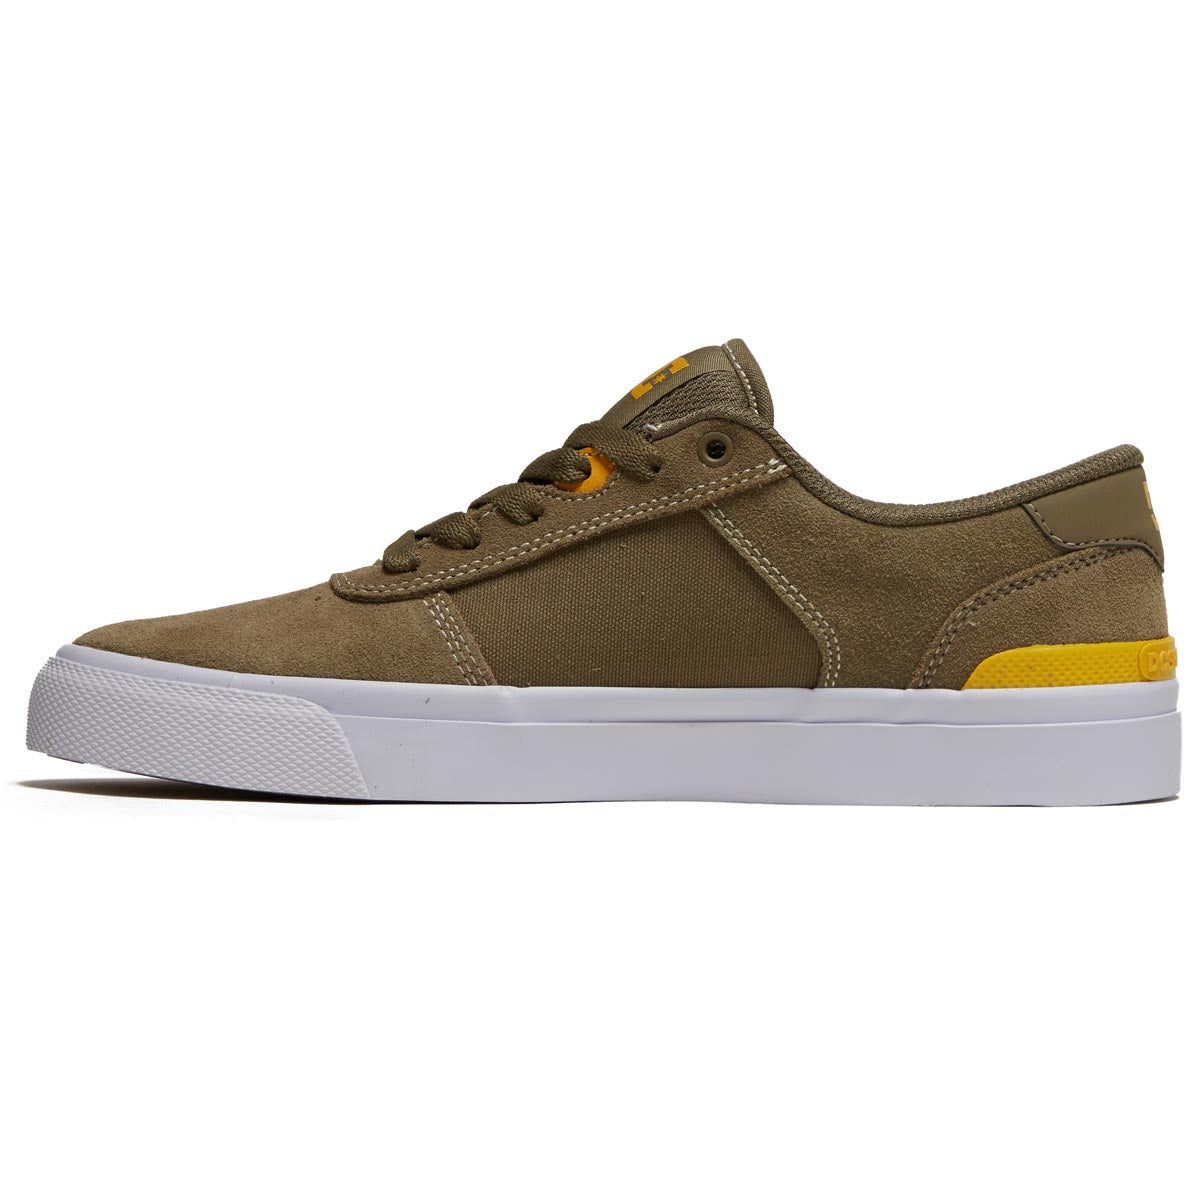 DC Teknic S Shoes - Army/Olive image 1